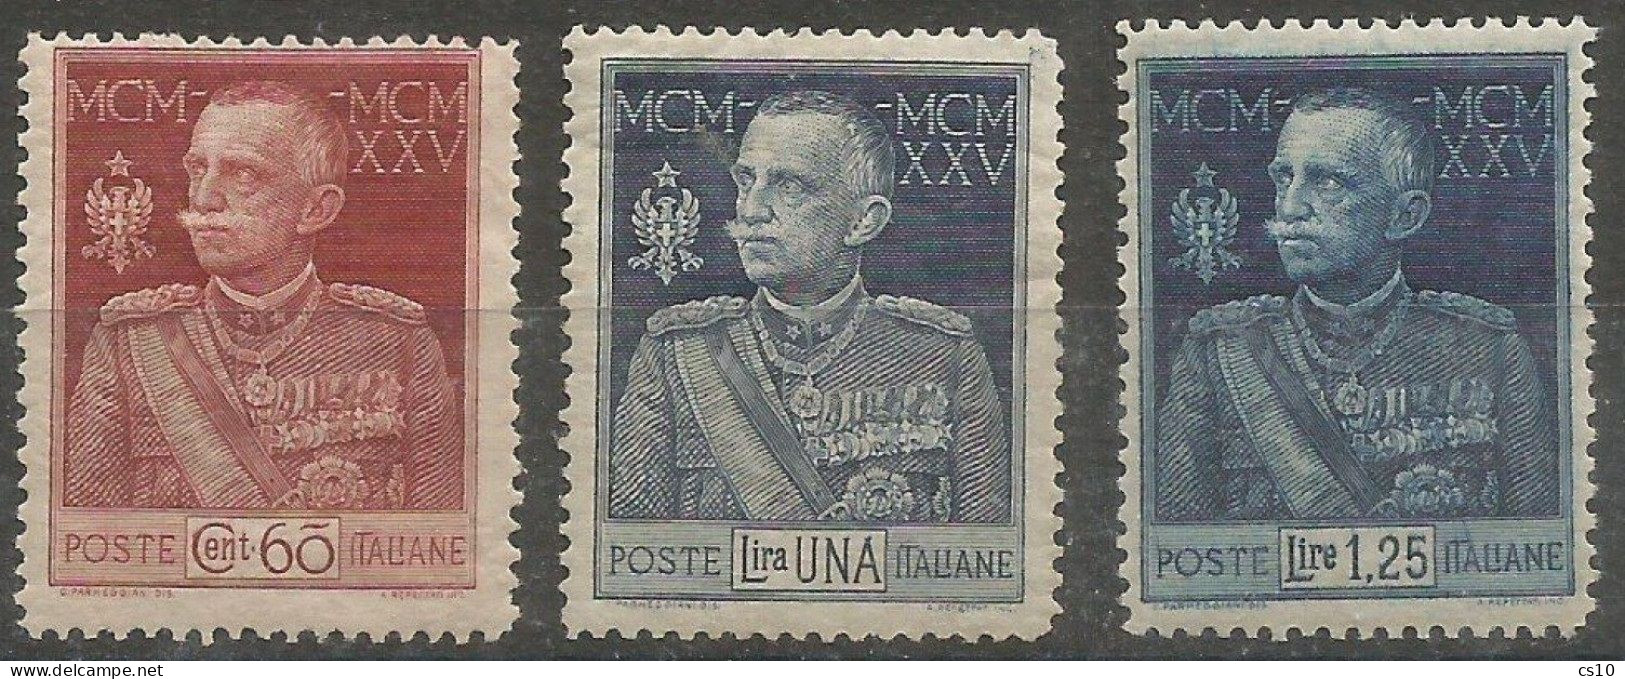 Italia Italy Kingdom 1925/26 Silver Jubilee P.13 1/2 MNH** Cpl 3v Set - HVs Well Centered Giubileo - Collections